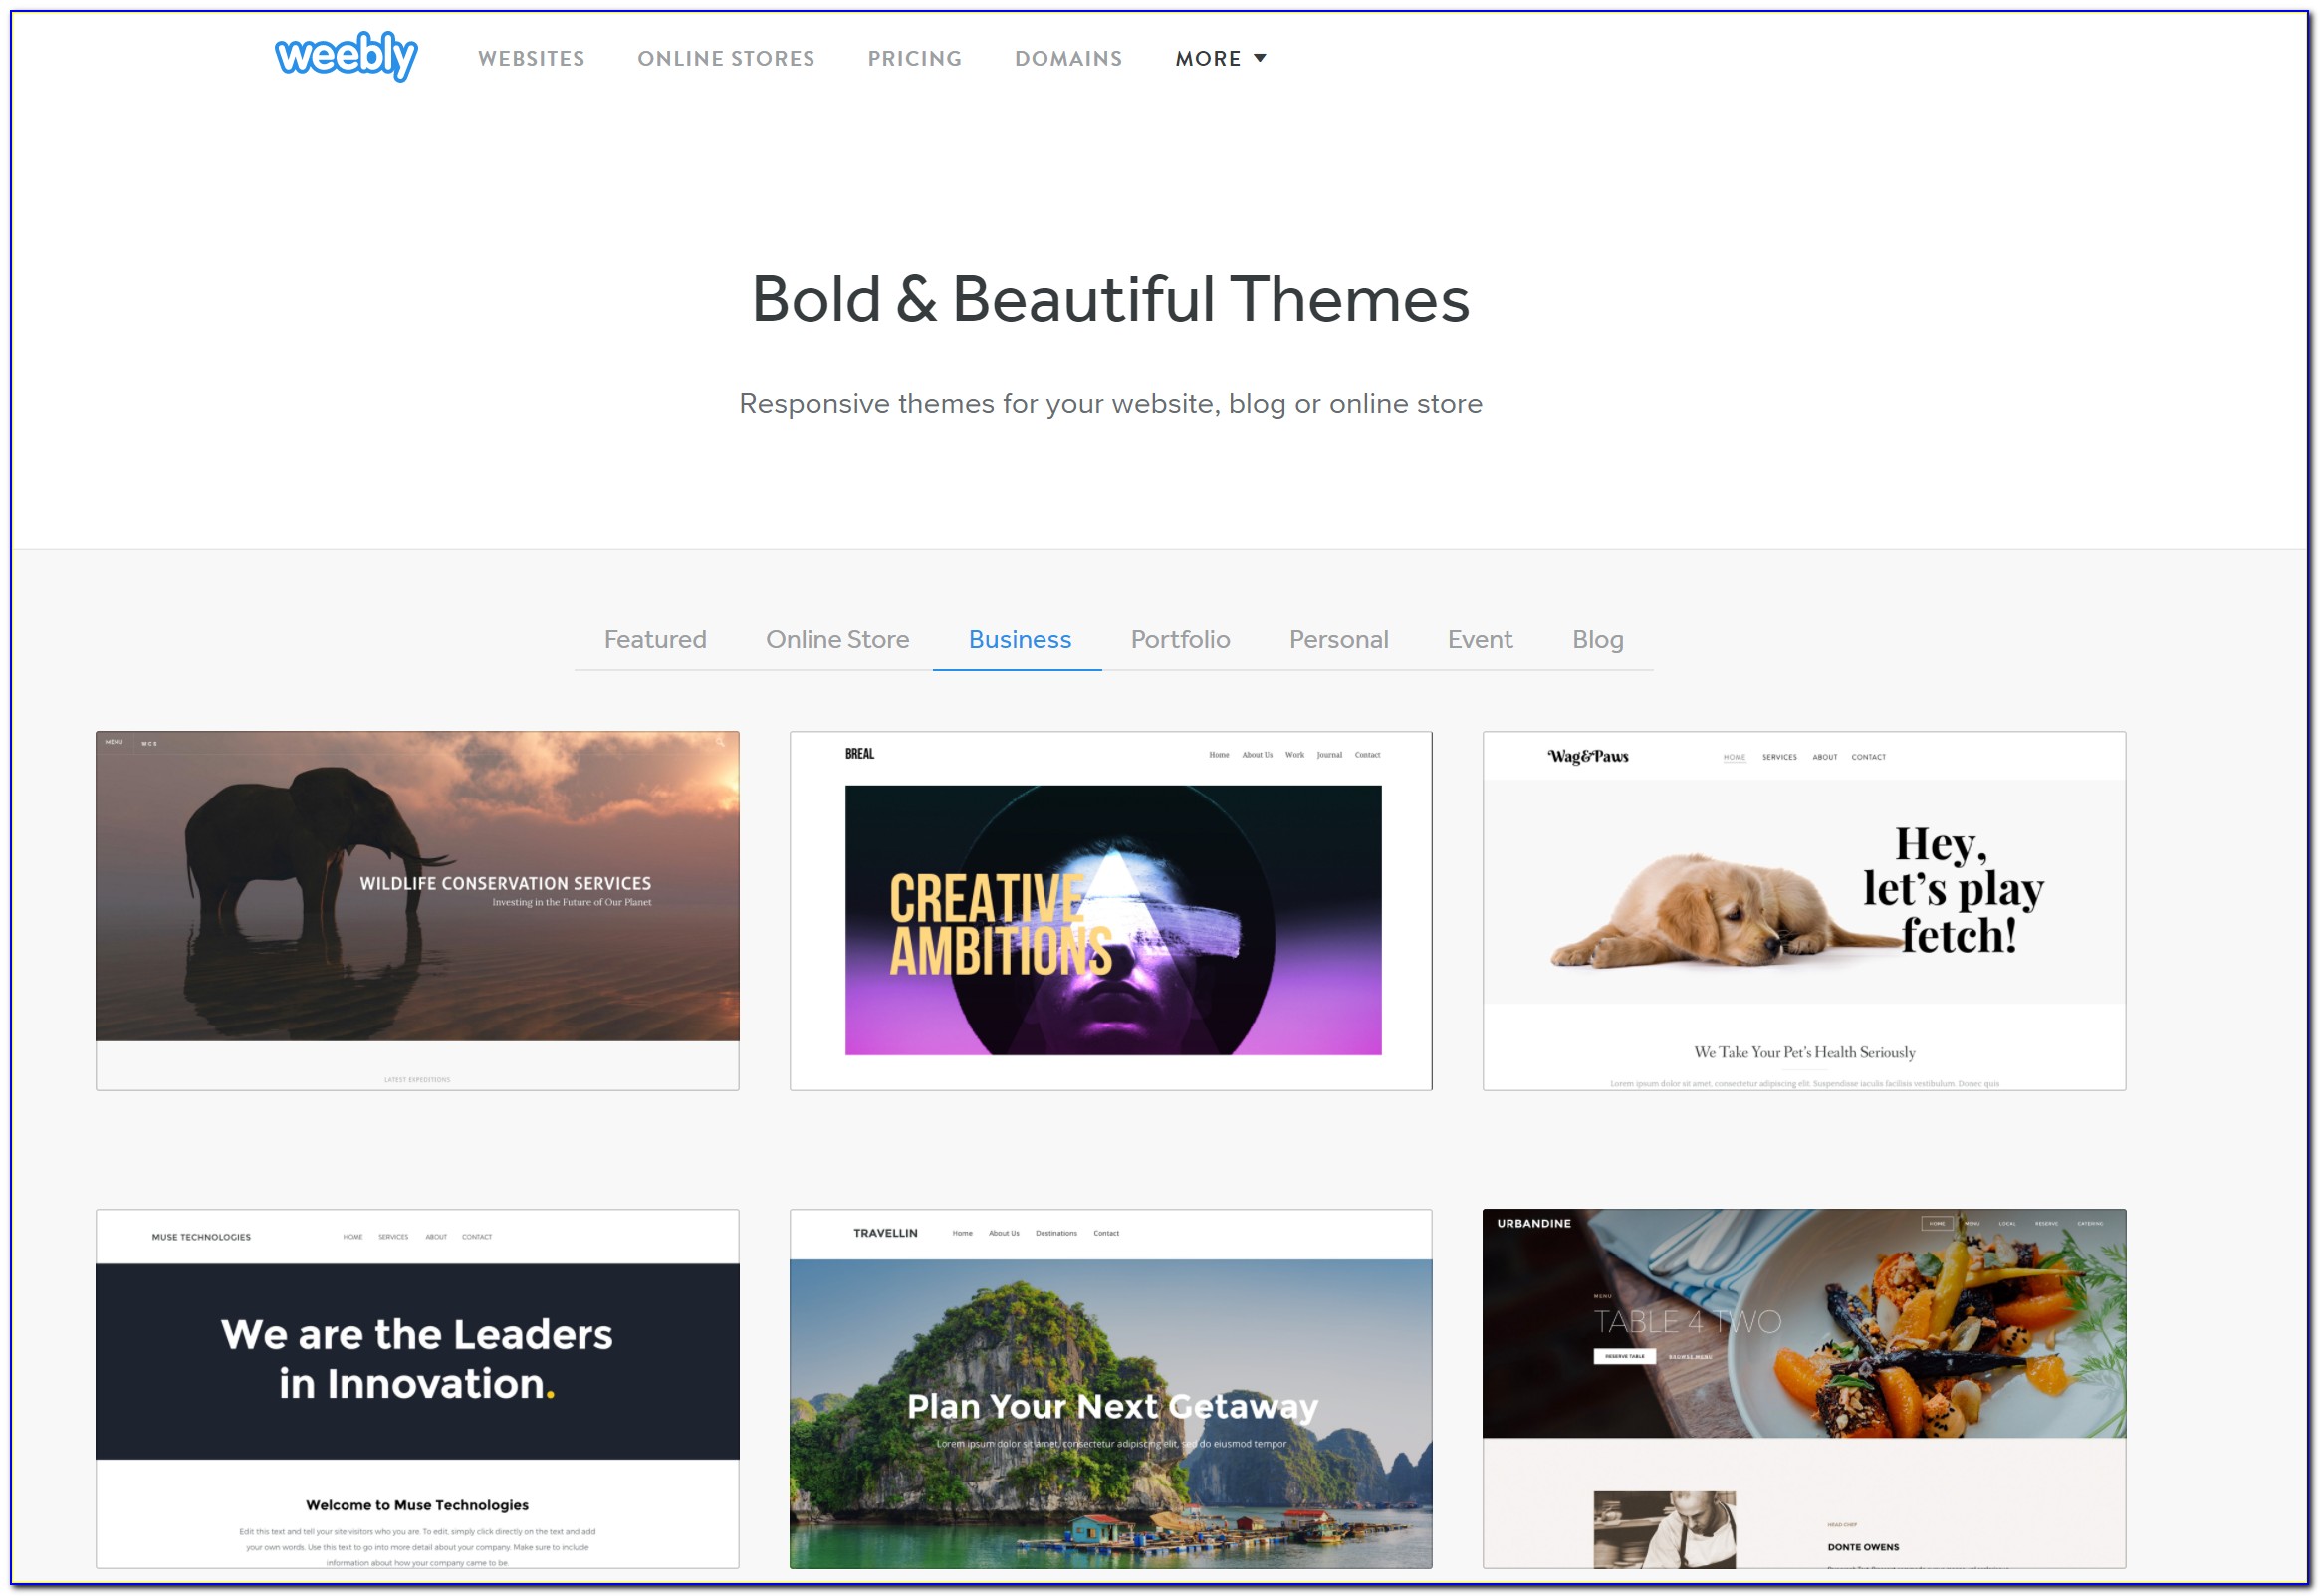 Website Templates For Weebly